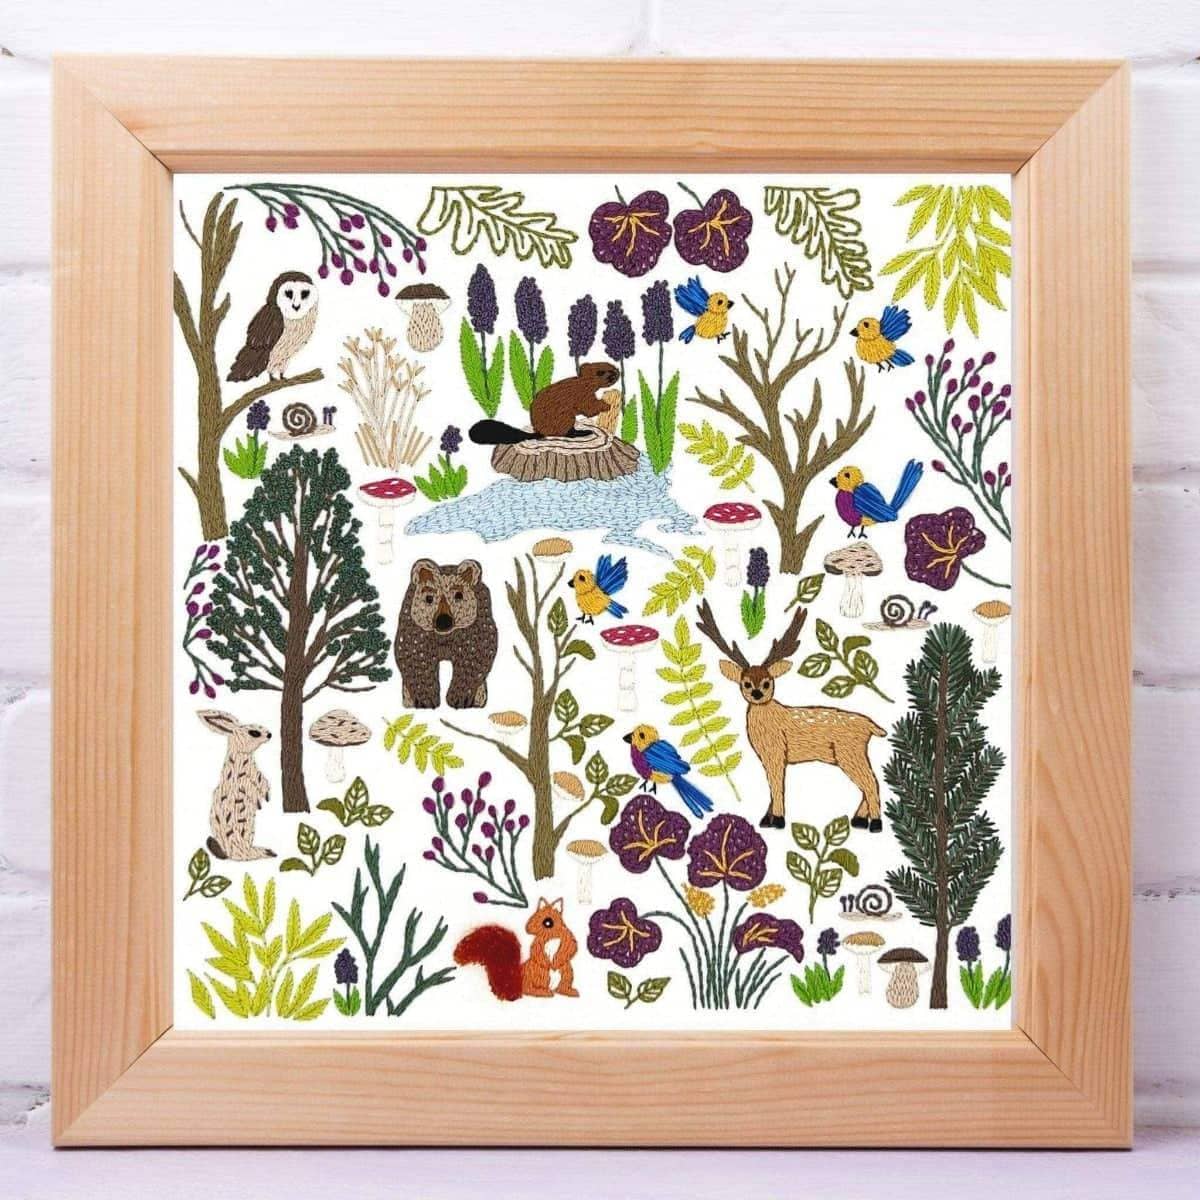 Into the Forest, Pre Printed Embroidery Fabric Panel PLUS PDF Pattern, Pre Printed Fabric Pattern, StitchDoodles, bird embroidery, Embroidery, embroidery hoop, embroidery hoop kit, embroidery kit for adults, embroidery kit for beginers, embroidery kits for beginners, embroidery pattern, forest embroidery, hand embroidery, hand embroidery fabric, hand embroidery kit, hand embroidery seat frame, nurge embroidery hoop, PDF pattern, Printed Pattern, wildlife embroidery, StitchDoodles, shop.stitchdoodles.com